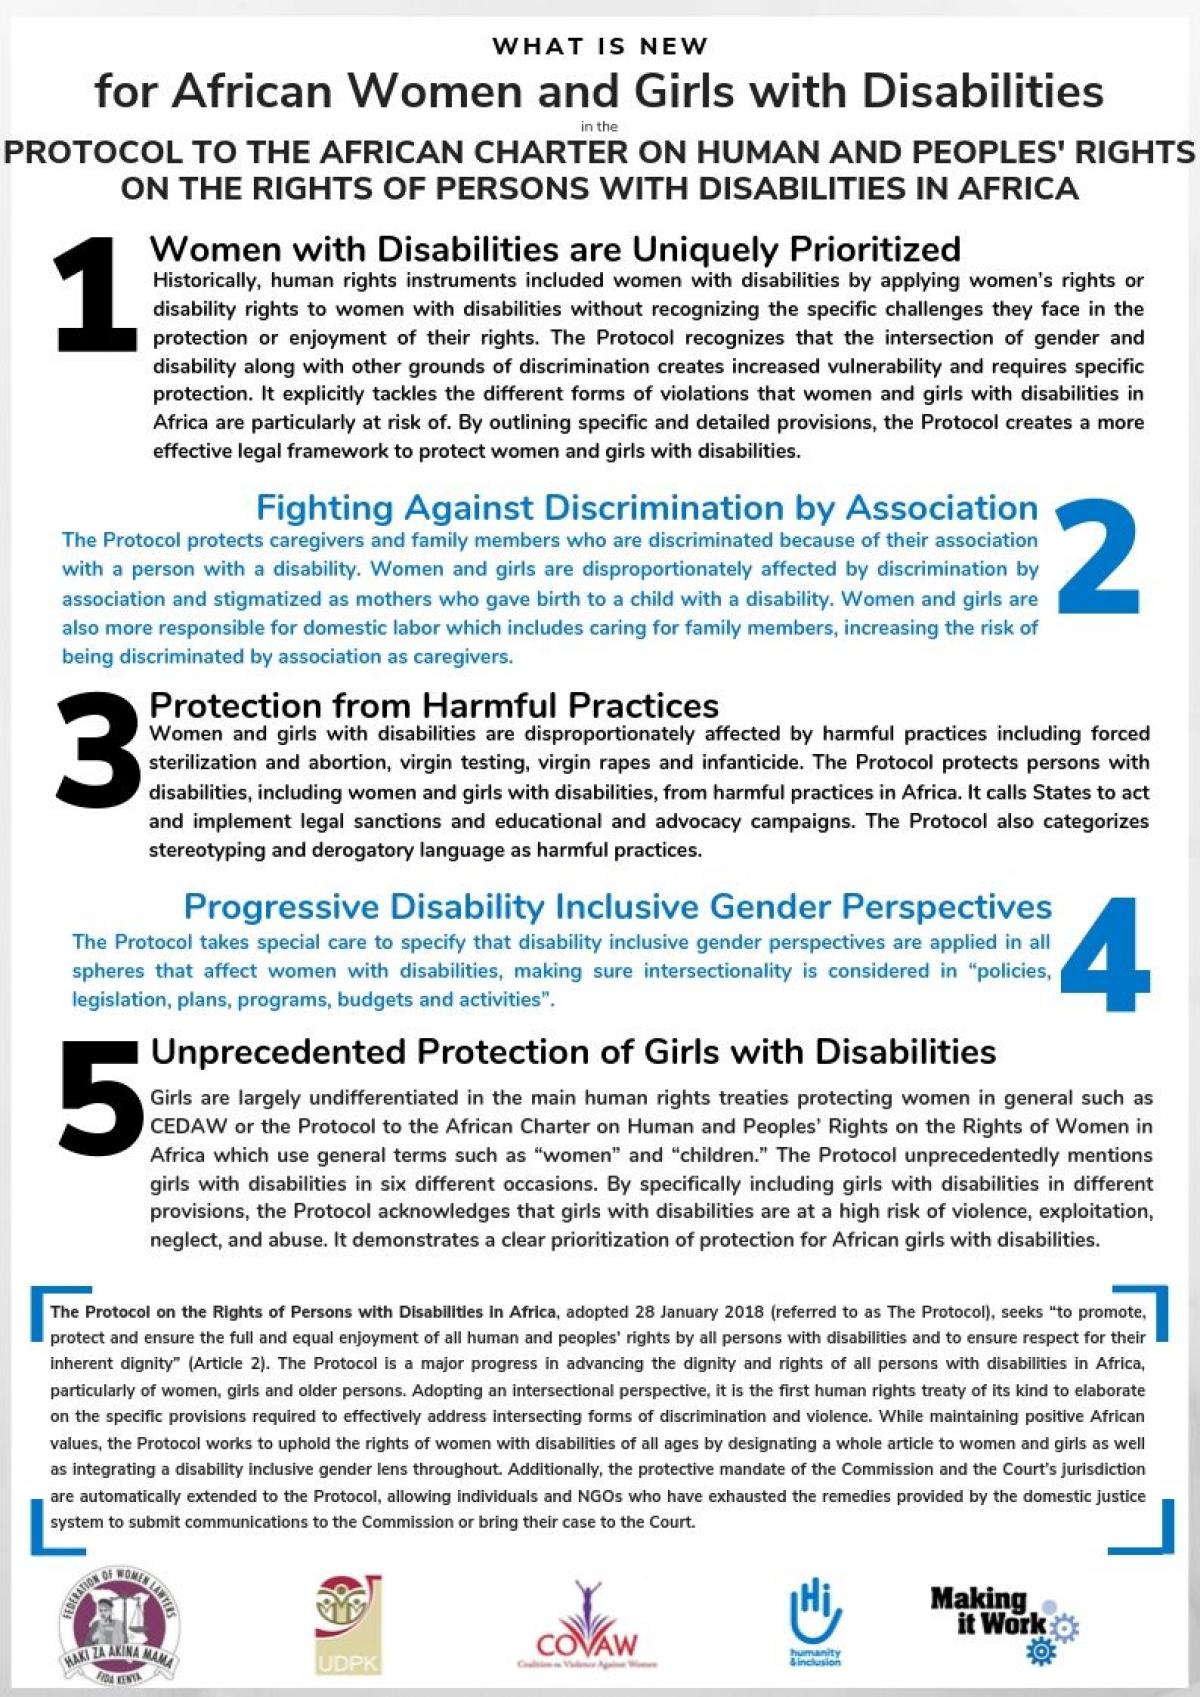 Display of the page 1 of our advocacy tool on the AU Protocol, with 5 key points. 